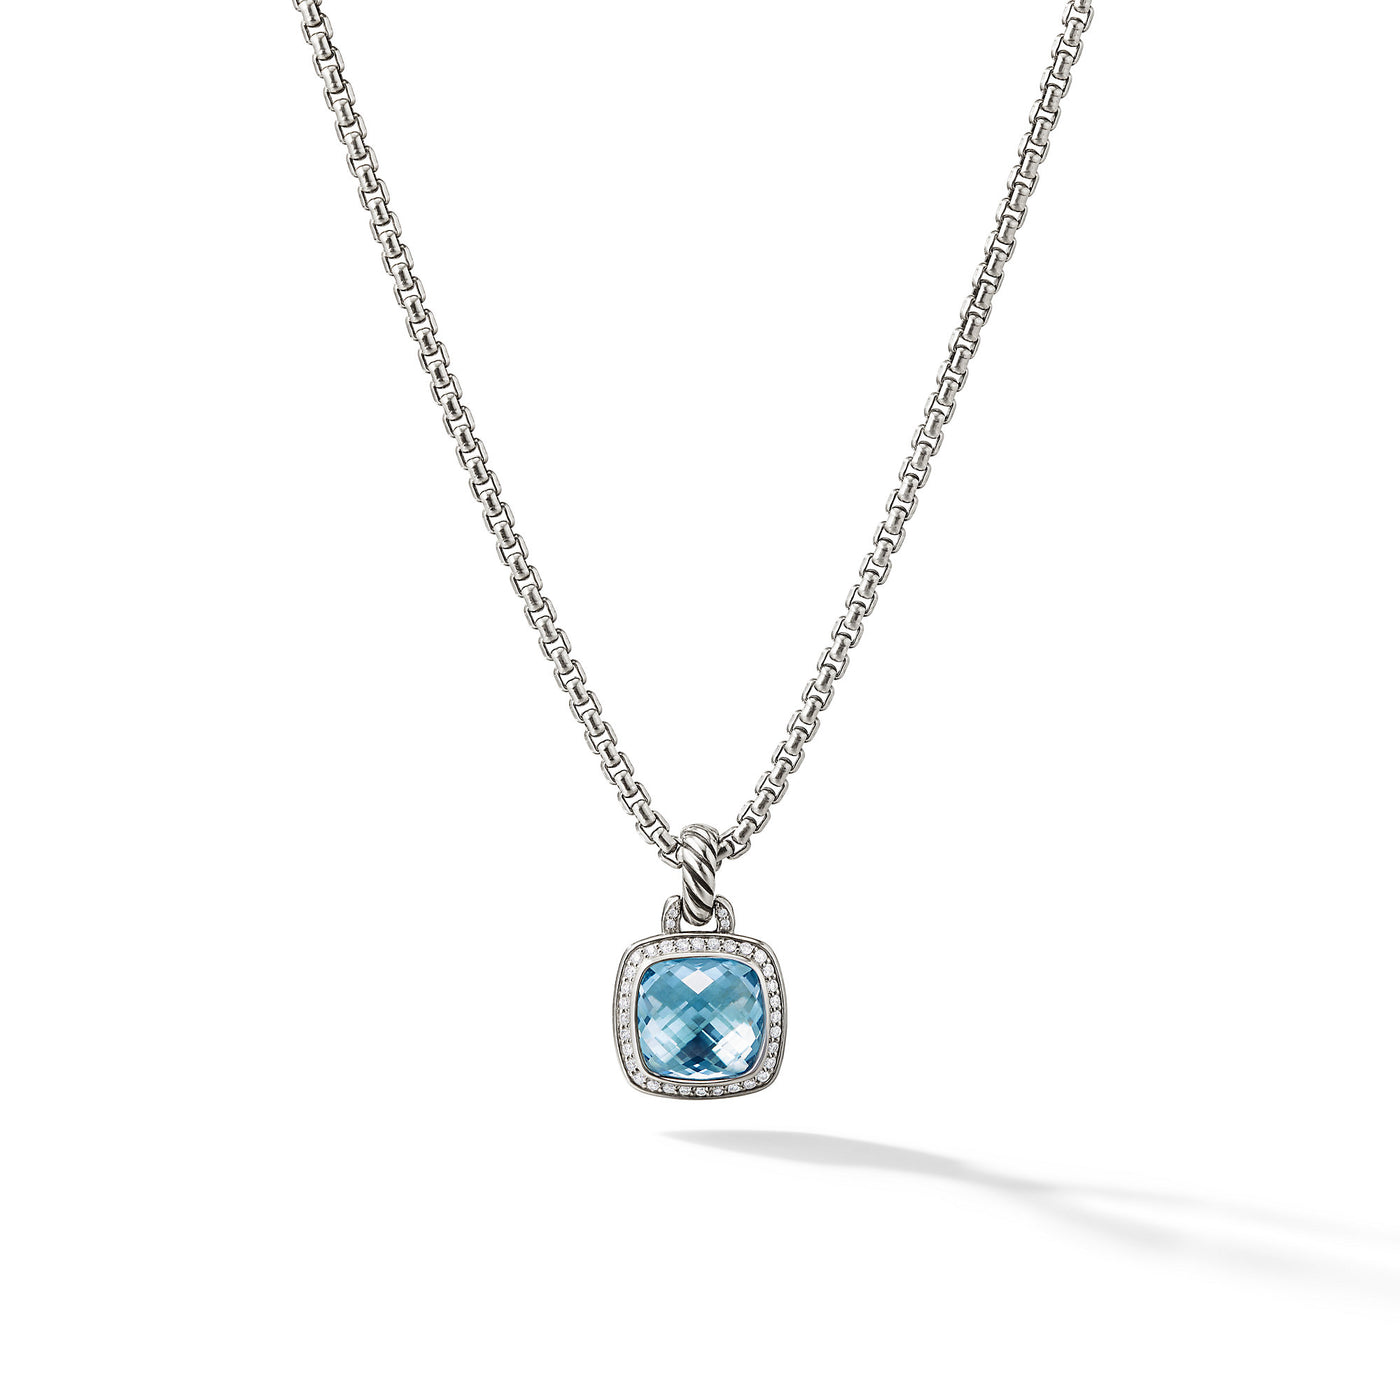 Albion® Pendant in Sterling Silver with Blue Topaz and Diamonds\, 11mm